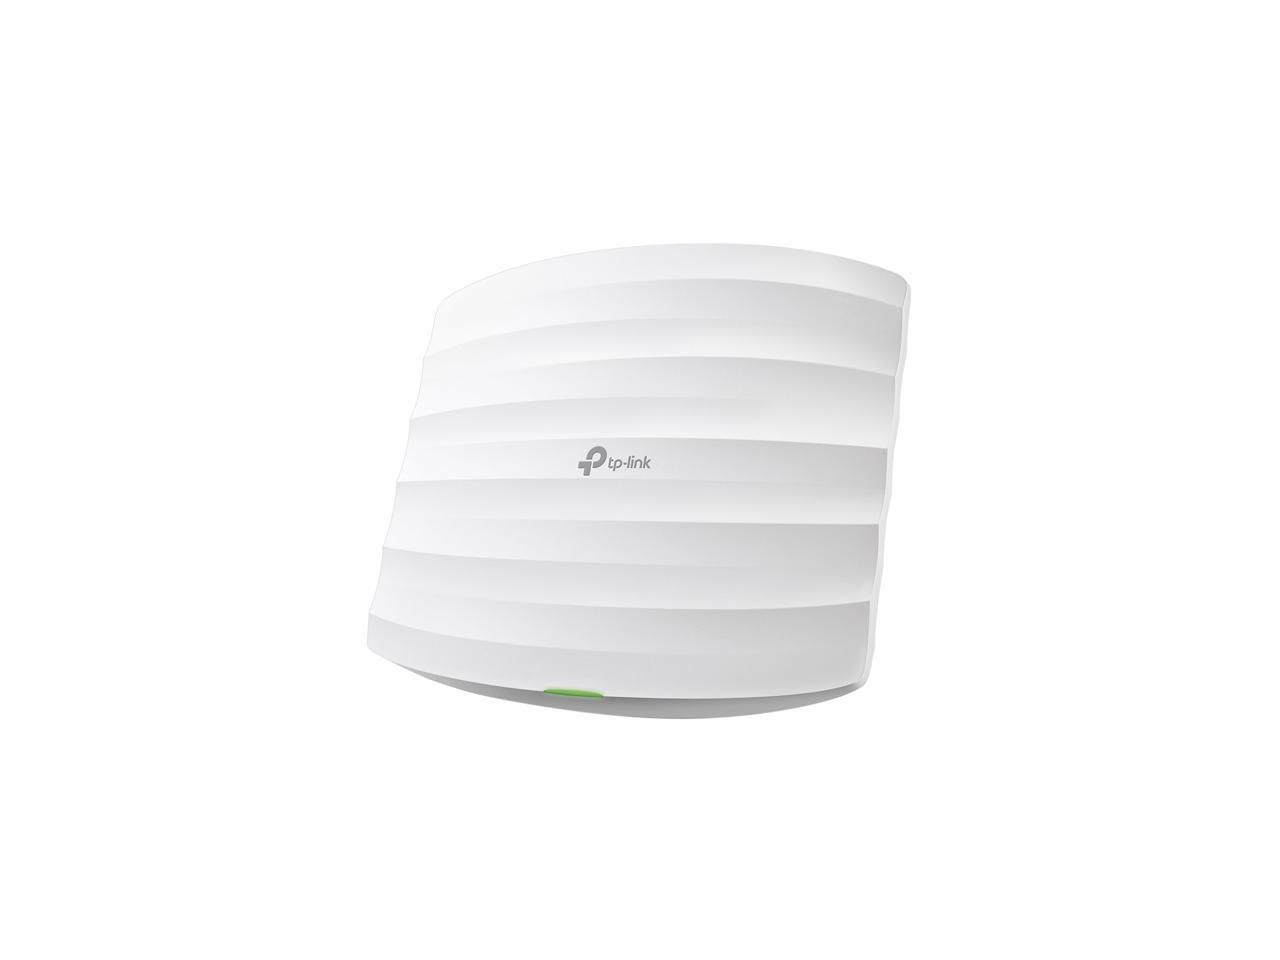 TP-LINK USA CORPORATION EAP115_V4 300MBPS WIRELESS N CEILING MOUNT ACCESS POINT